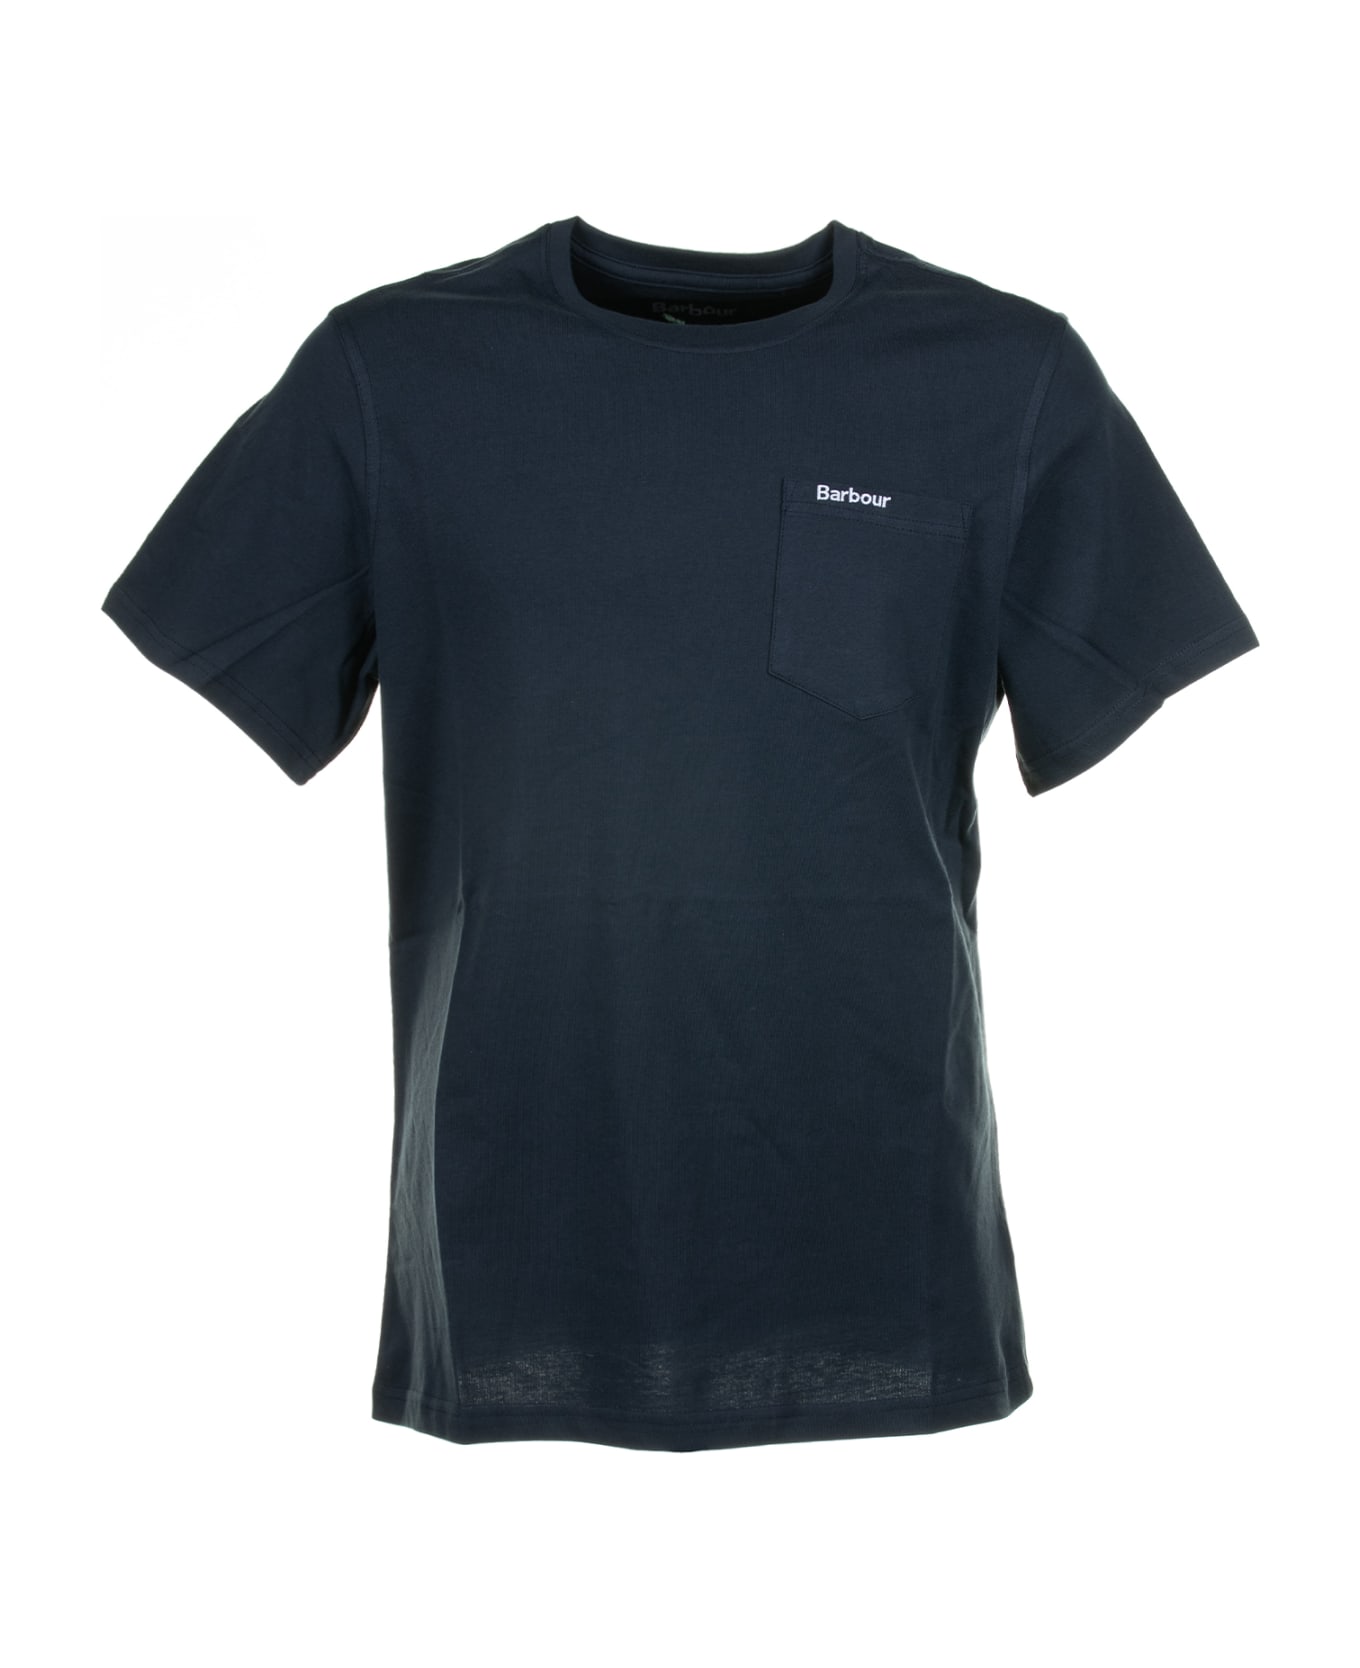 Barbour Navy Blue T-shirt With Pocket And Logo - NAVY